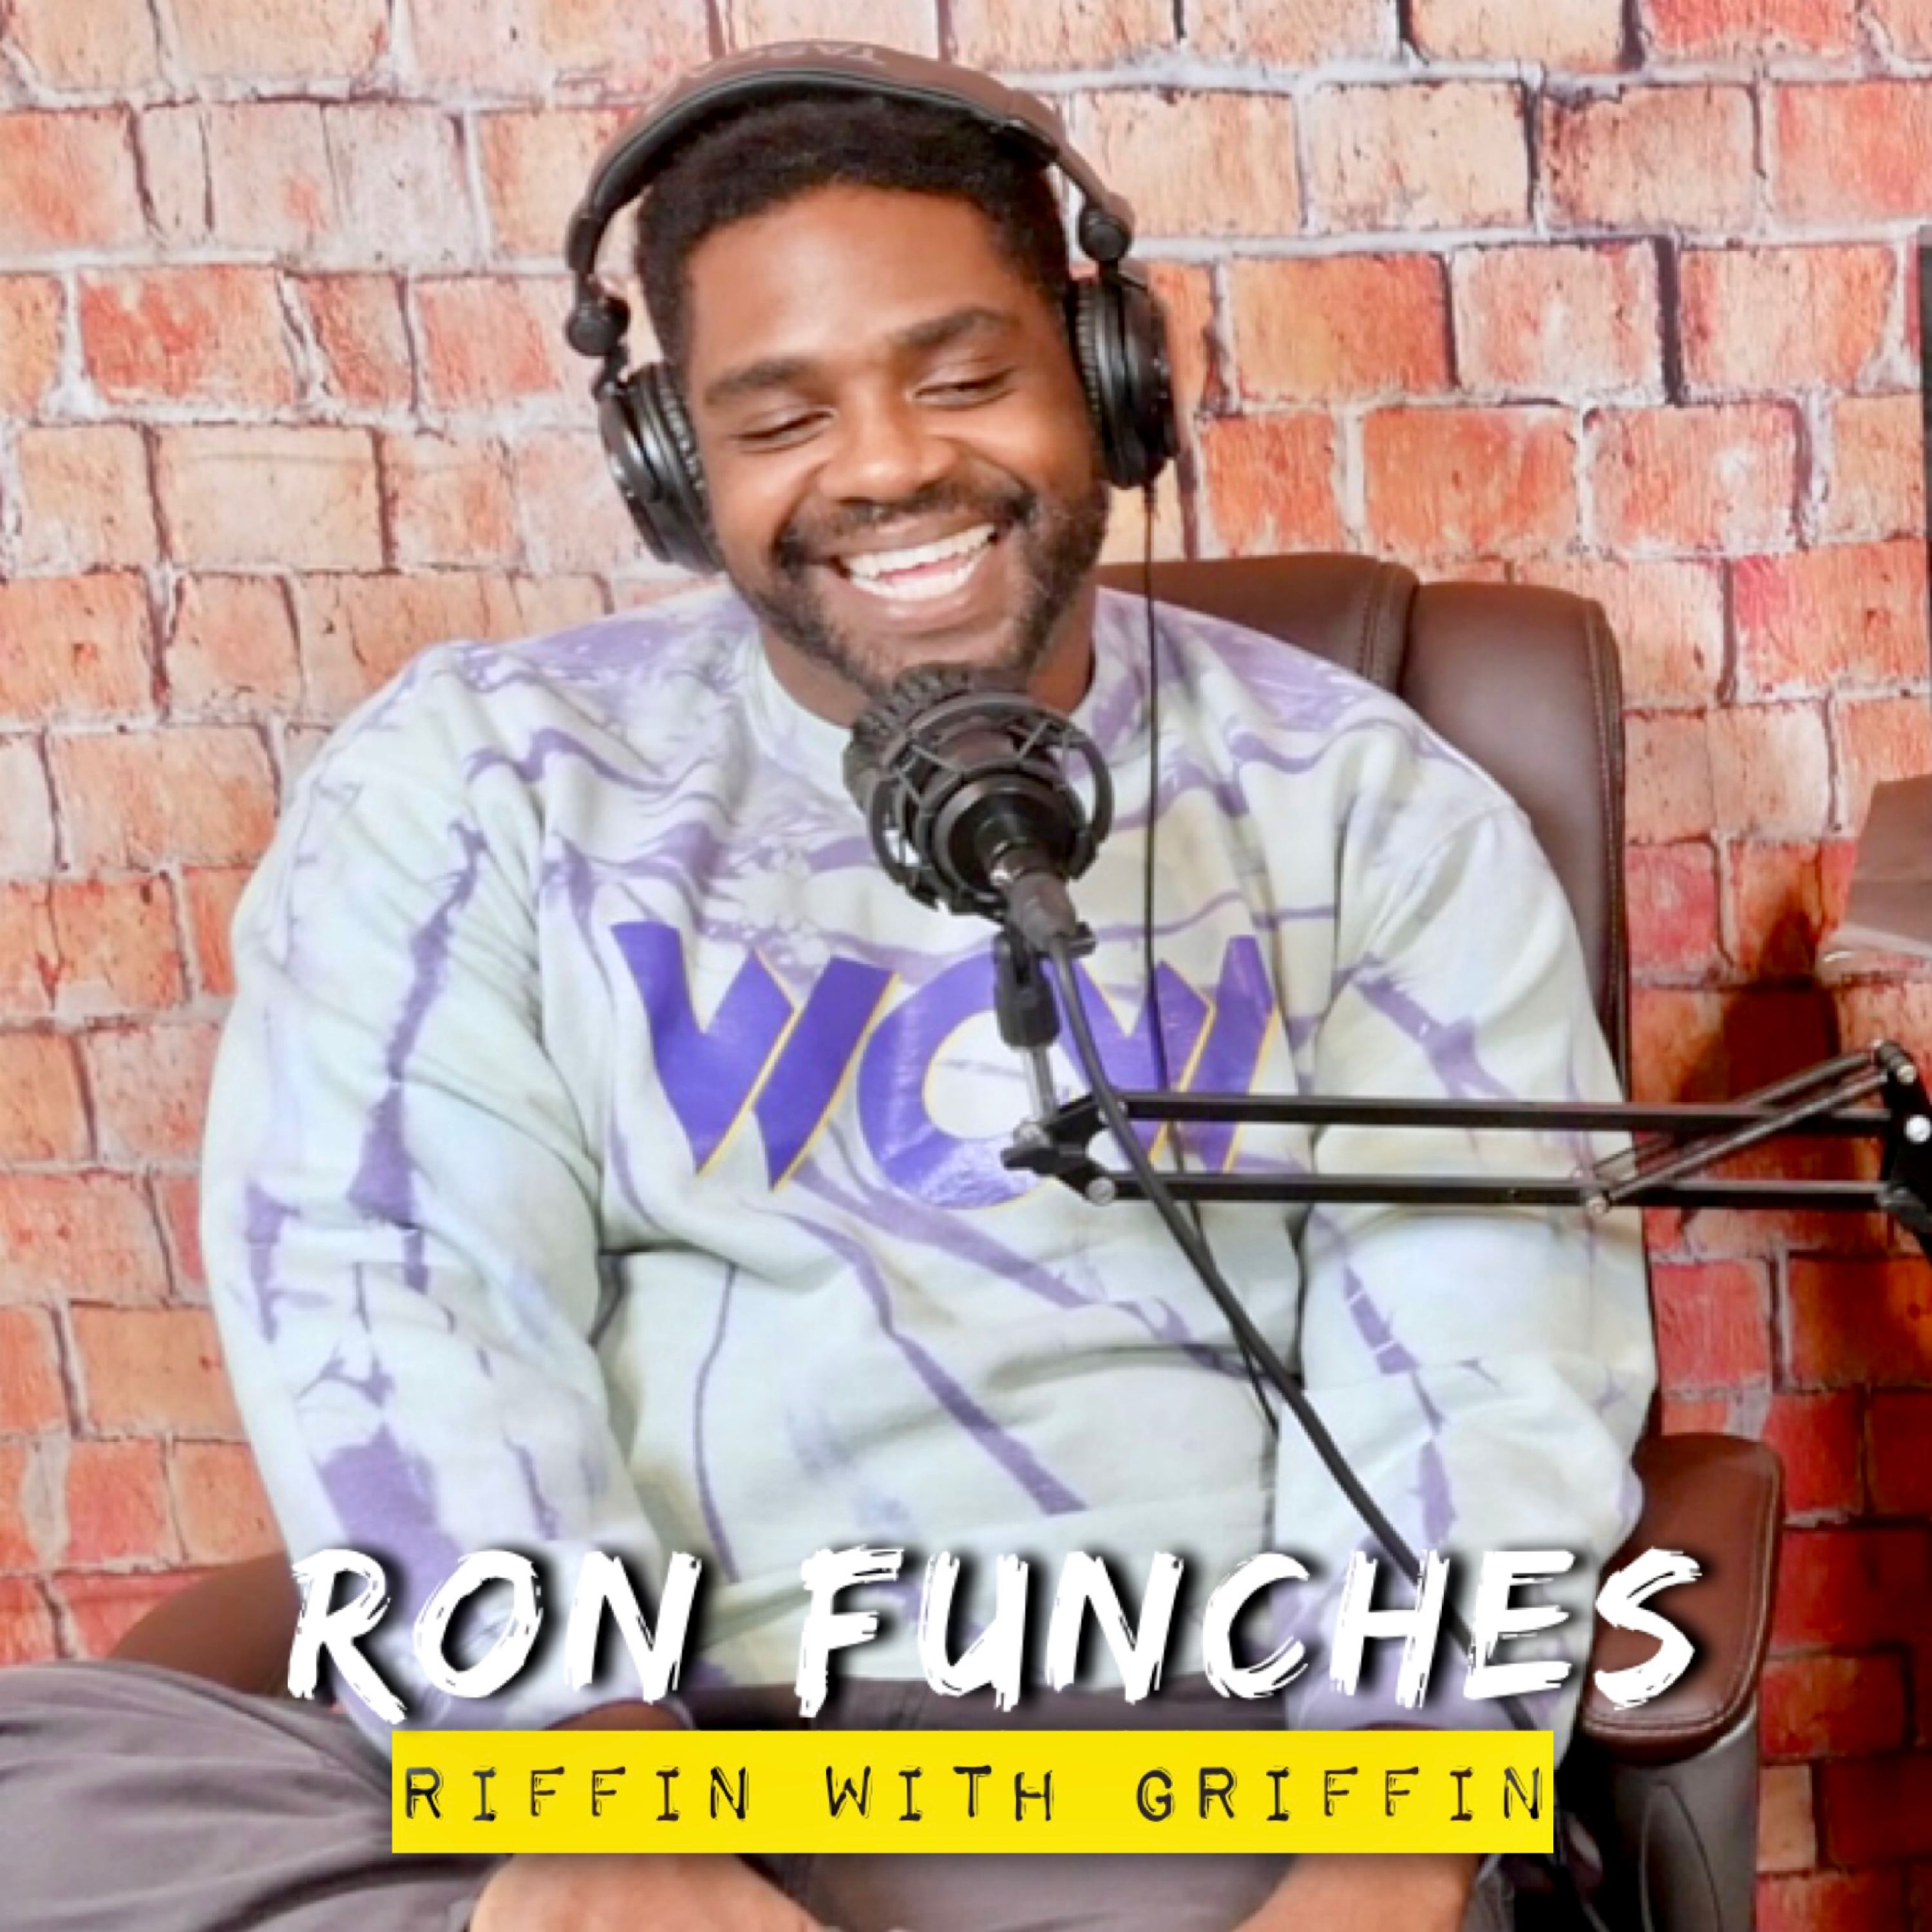 Ron Funches Part 2: Riffin with Griffin